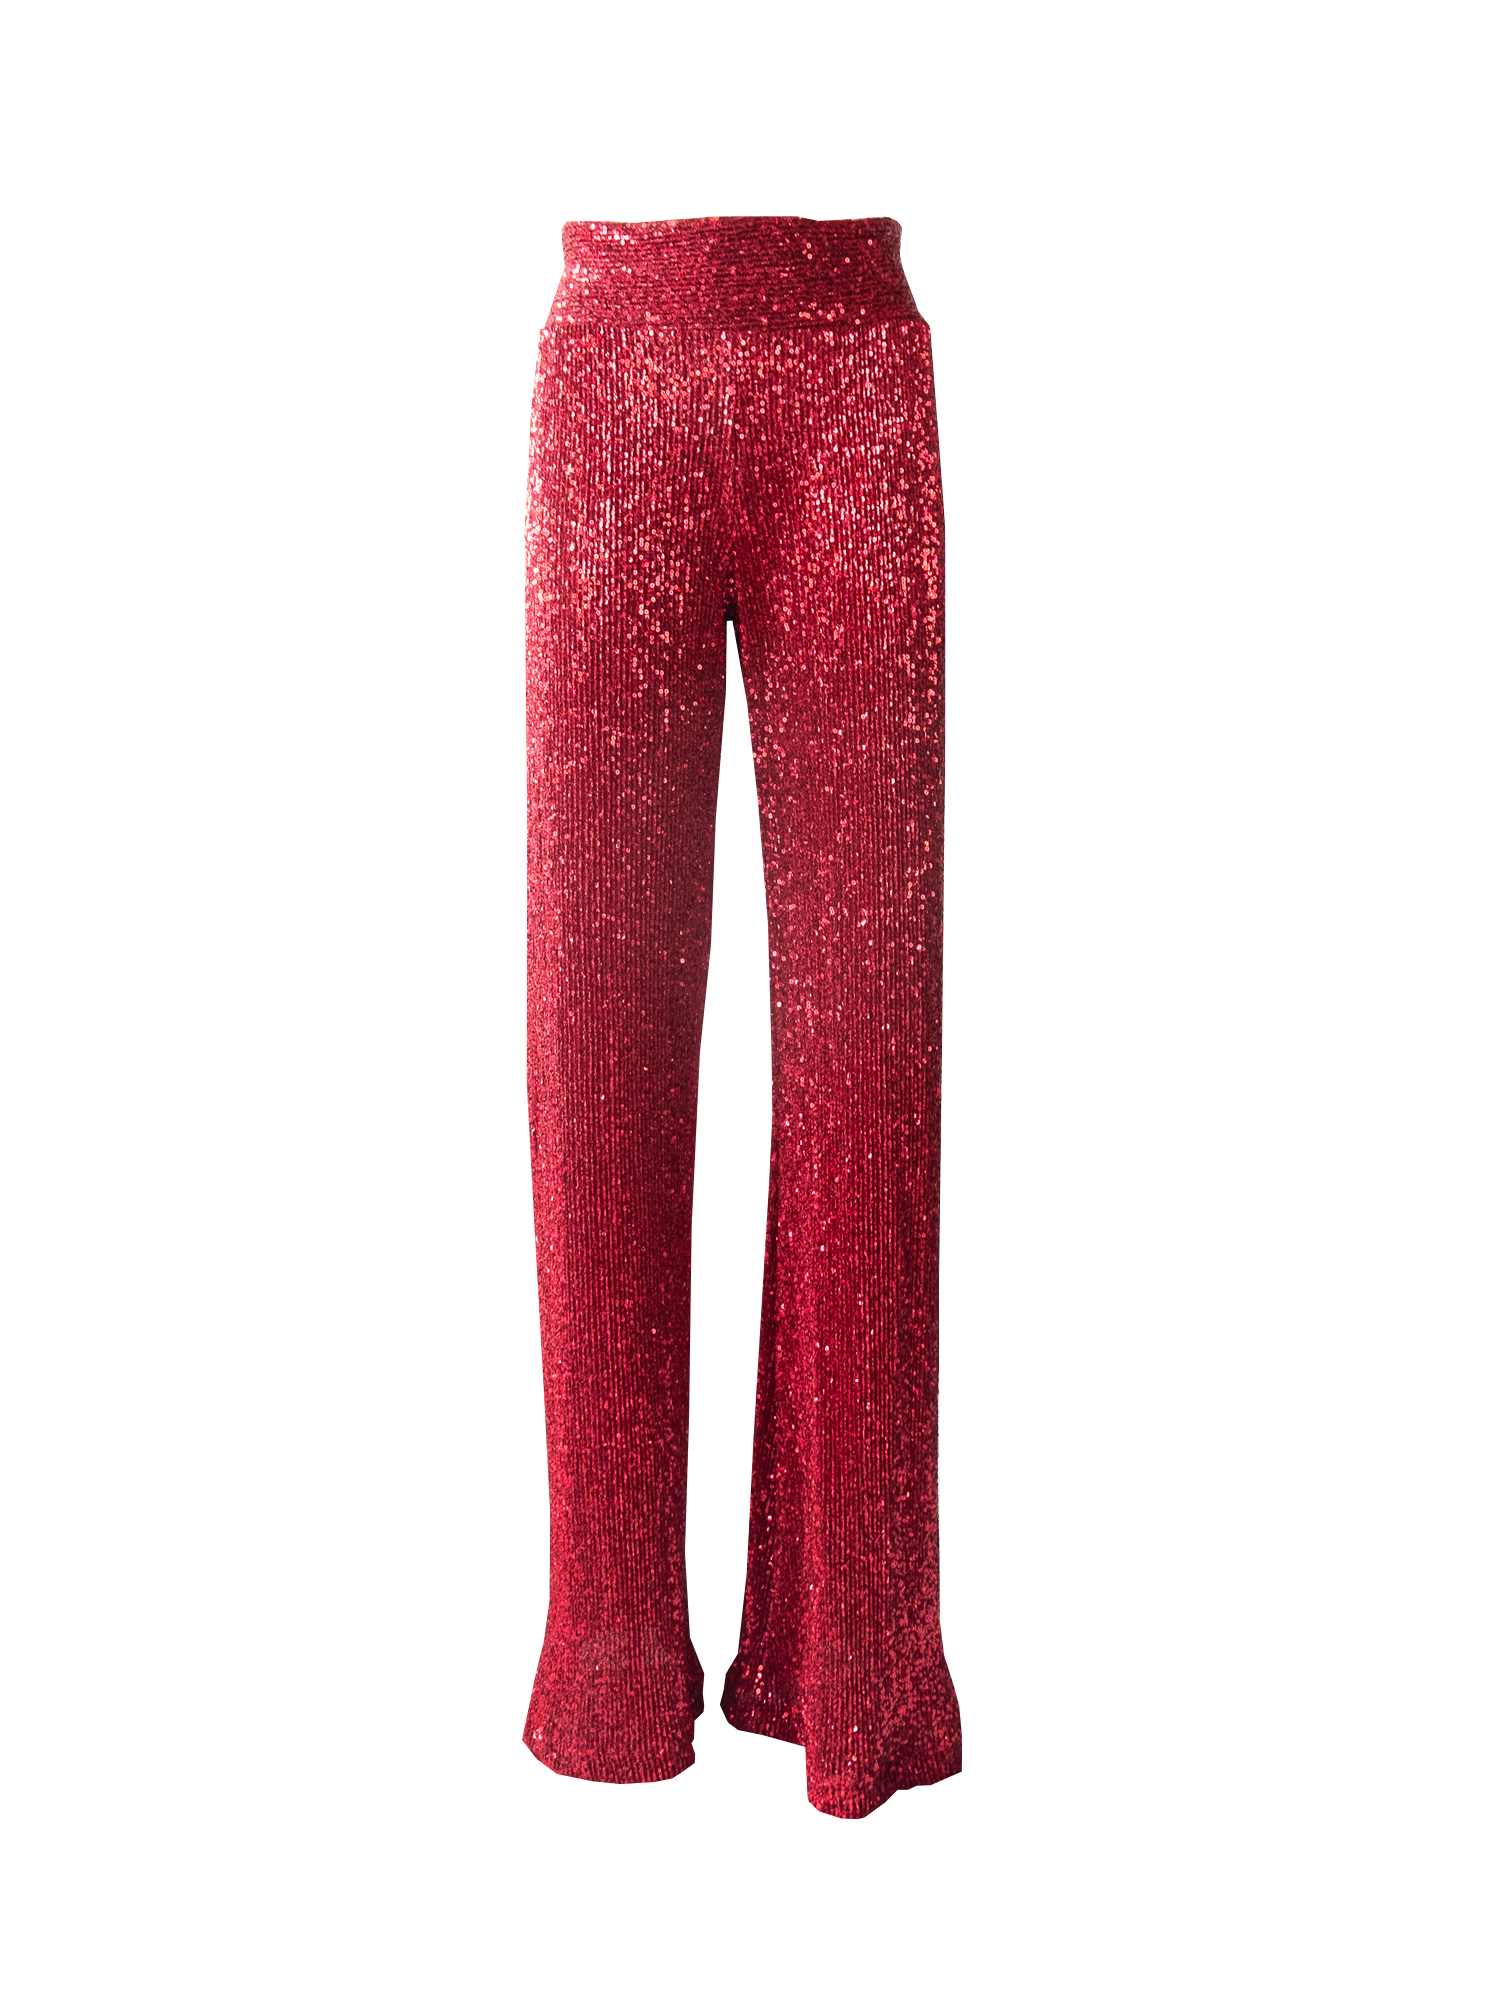 Amazon.com: REDESYN Pants for Women Women's Pant High Waist Sequin Flare  Leg Pants Pants (Color : Red, Size : Small) : Clothing, Shoes & Jewelry